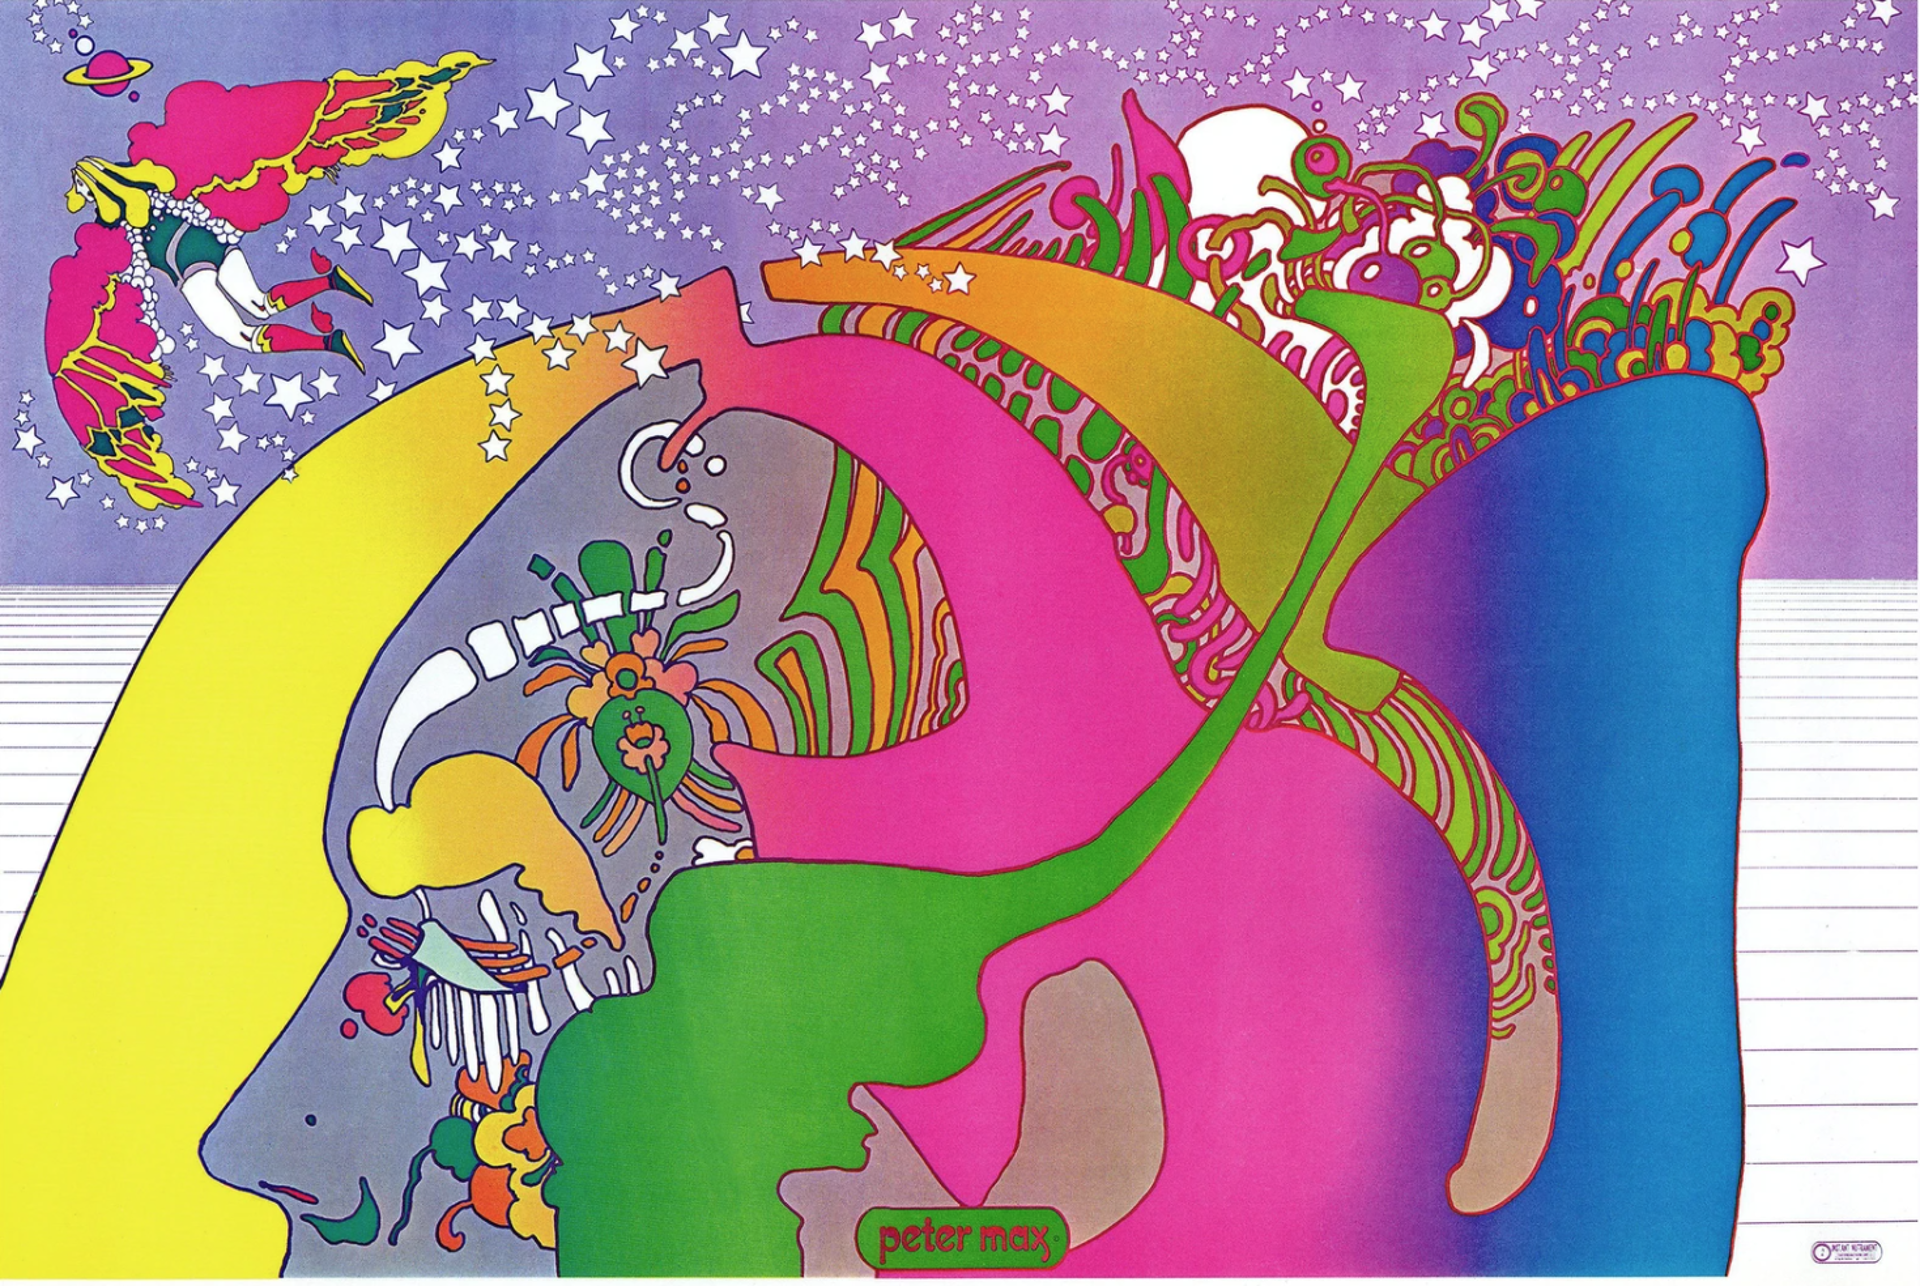 Instant Nutriment 2 by Peter Max